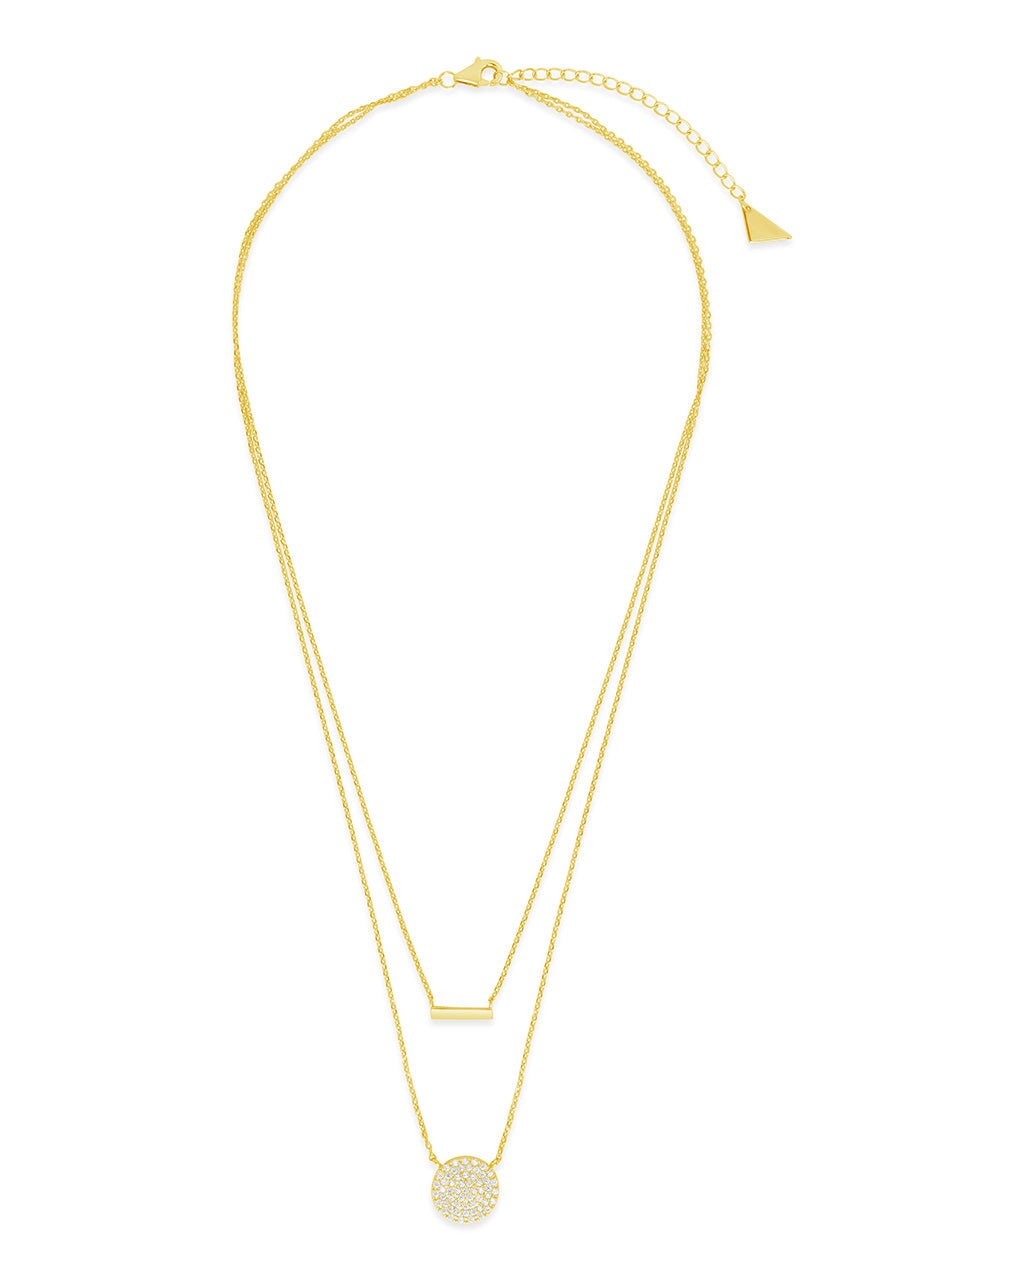 Vivian Layered Necklace Necklace Sterling Forever 